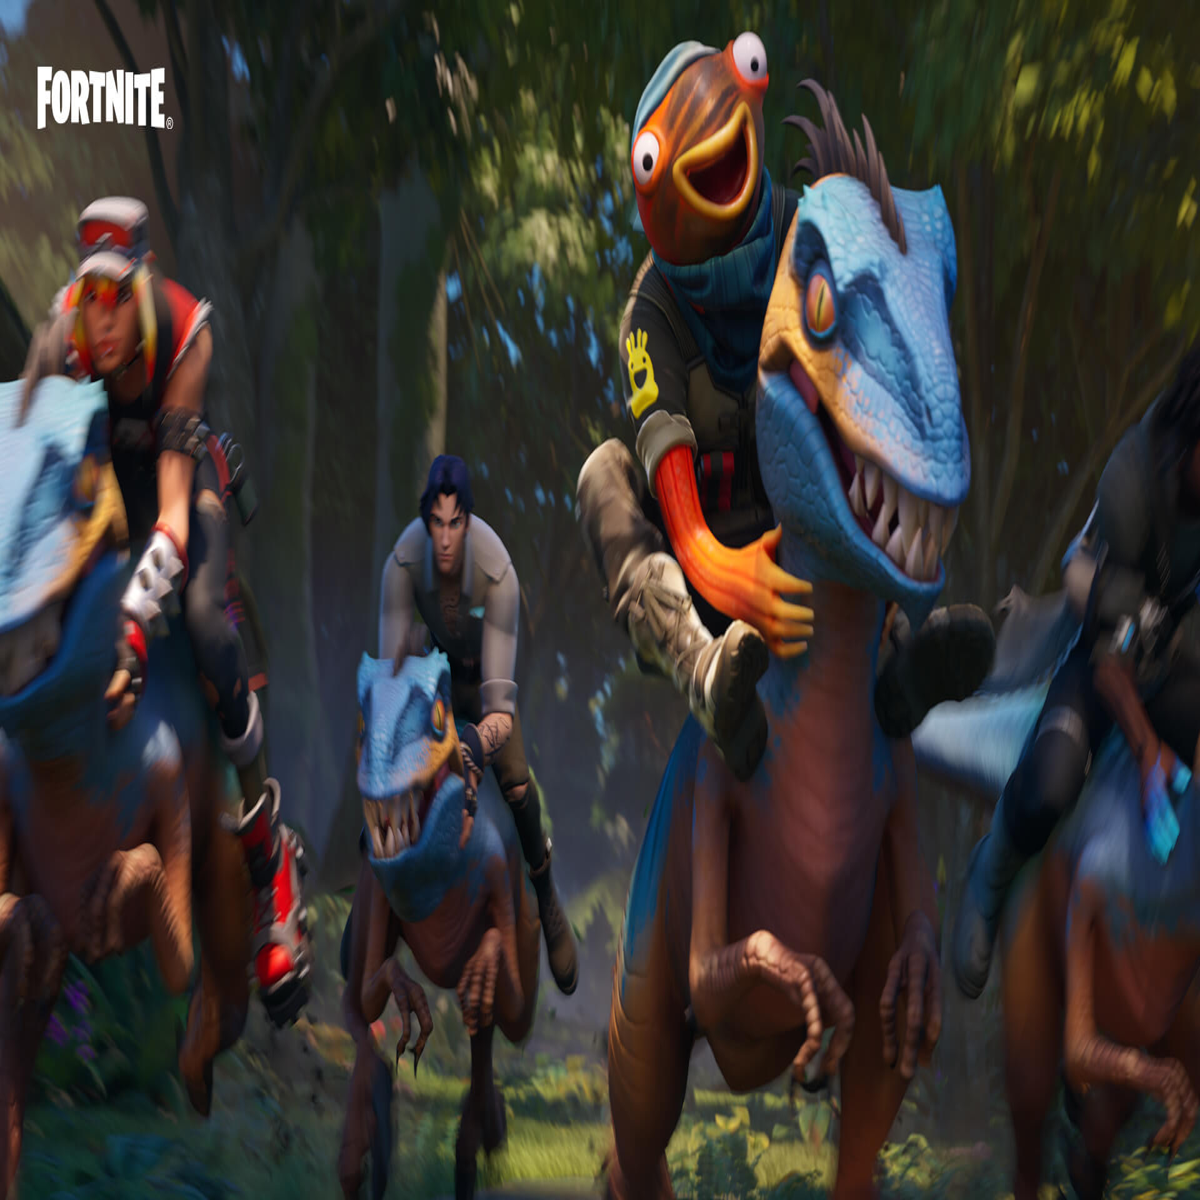 Fortnite''s PC exclusive pack 'Street Shadows' is currently free